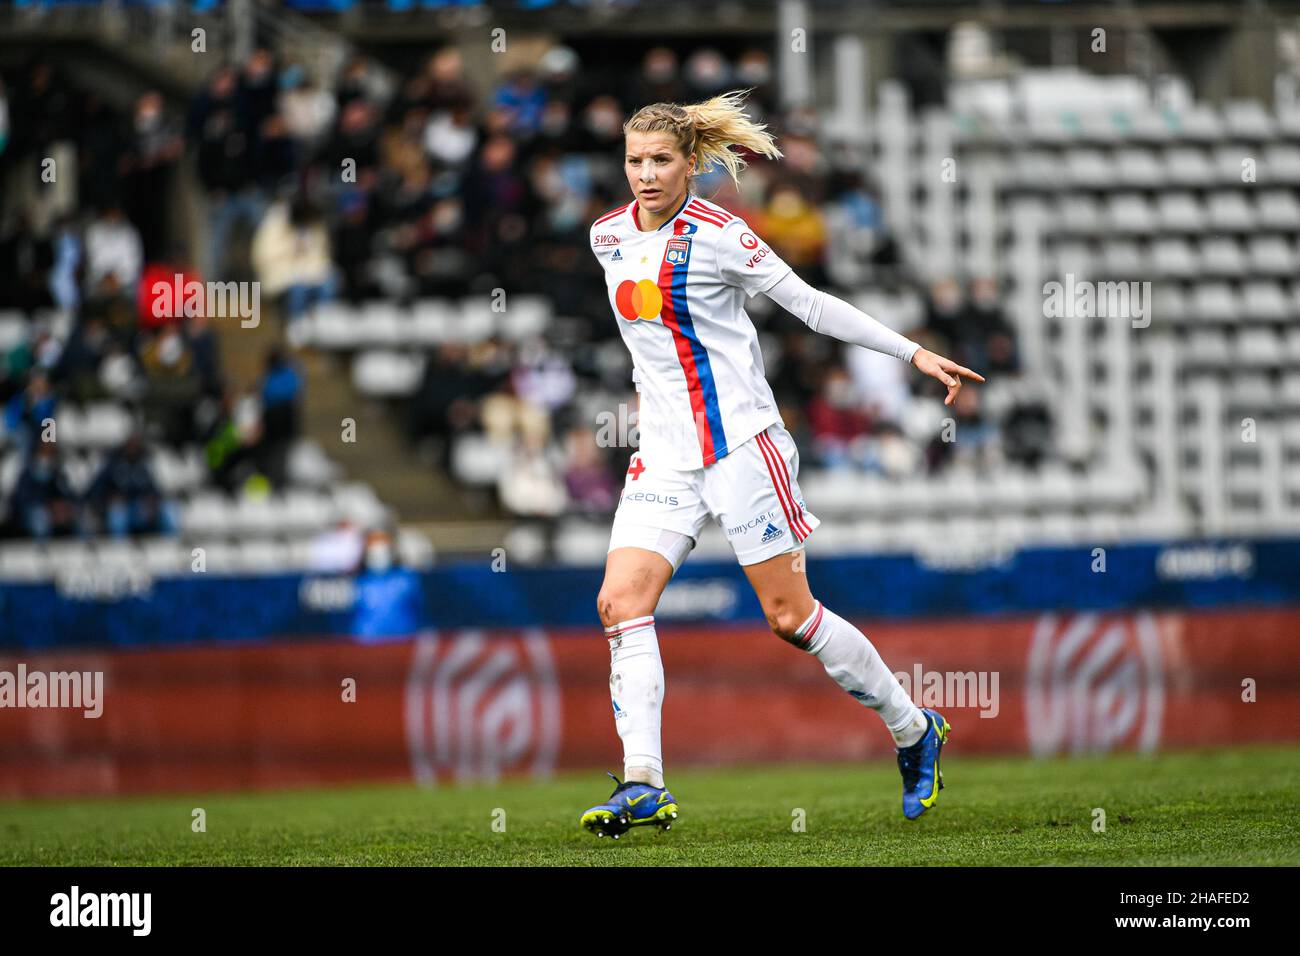 Paris, France. 12th Dec, 2021. Ada Hegerberg of Olympique Lyonnais during the Women's French championship, D1 Arkema football match between Paris FC and Olympique Lyonnais (OL) on December 12, 2021 at Charlety Stadium in Paris, France. Credit: Victor Joly/Alamy Live News Stock Photo